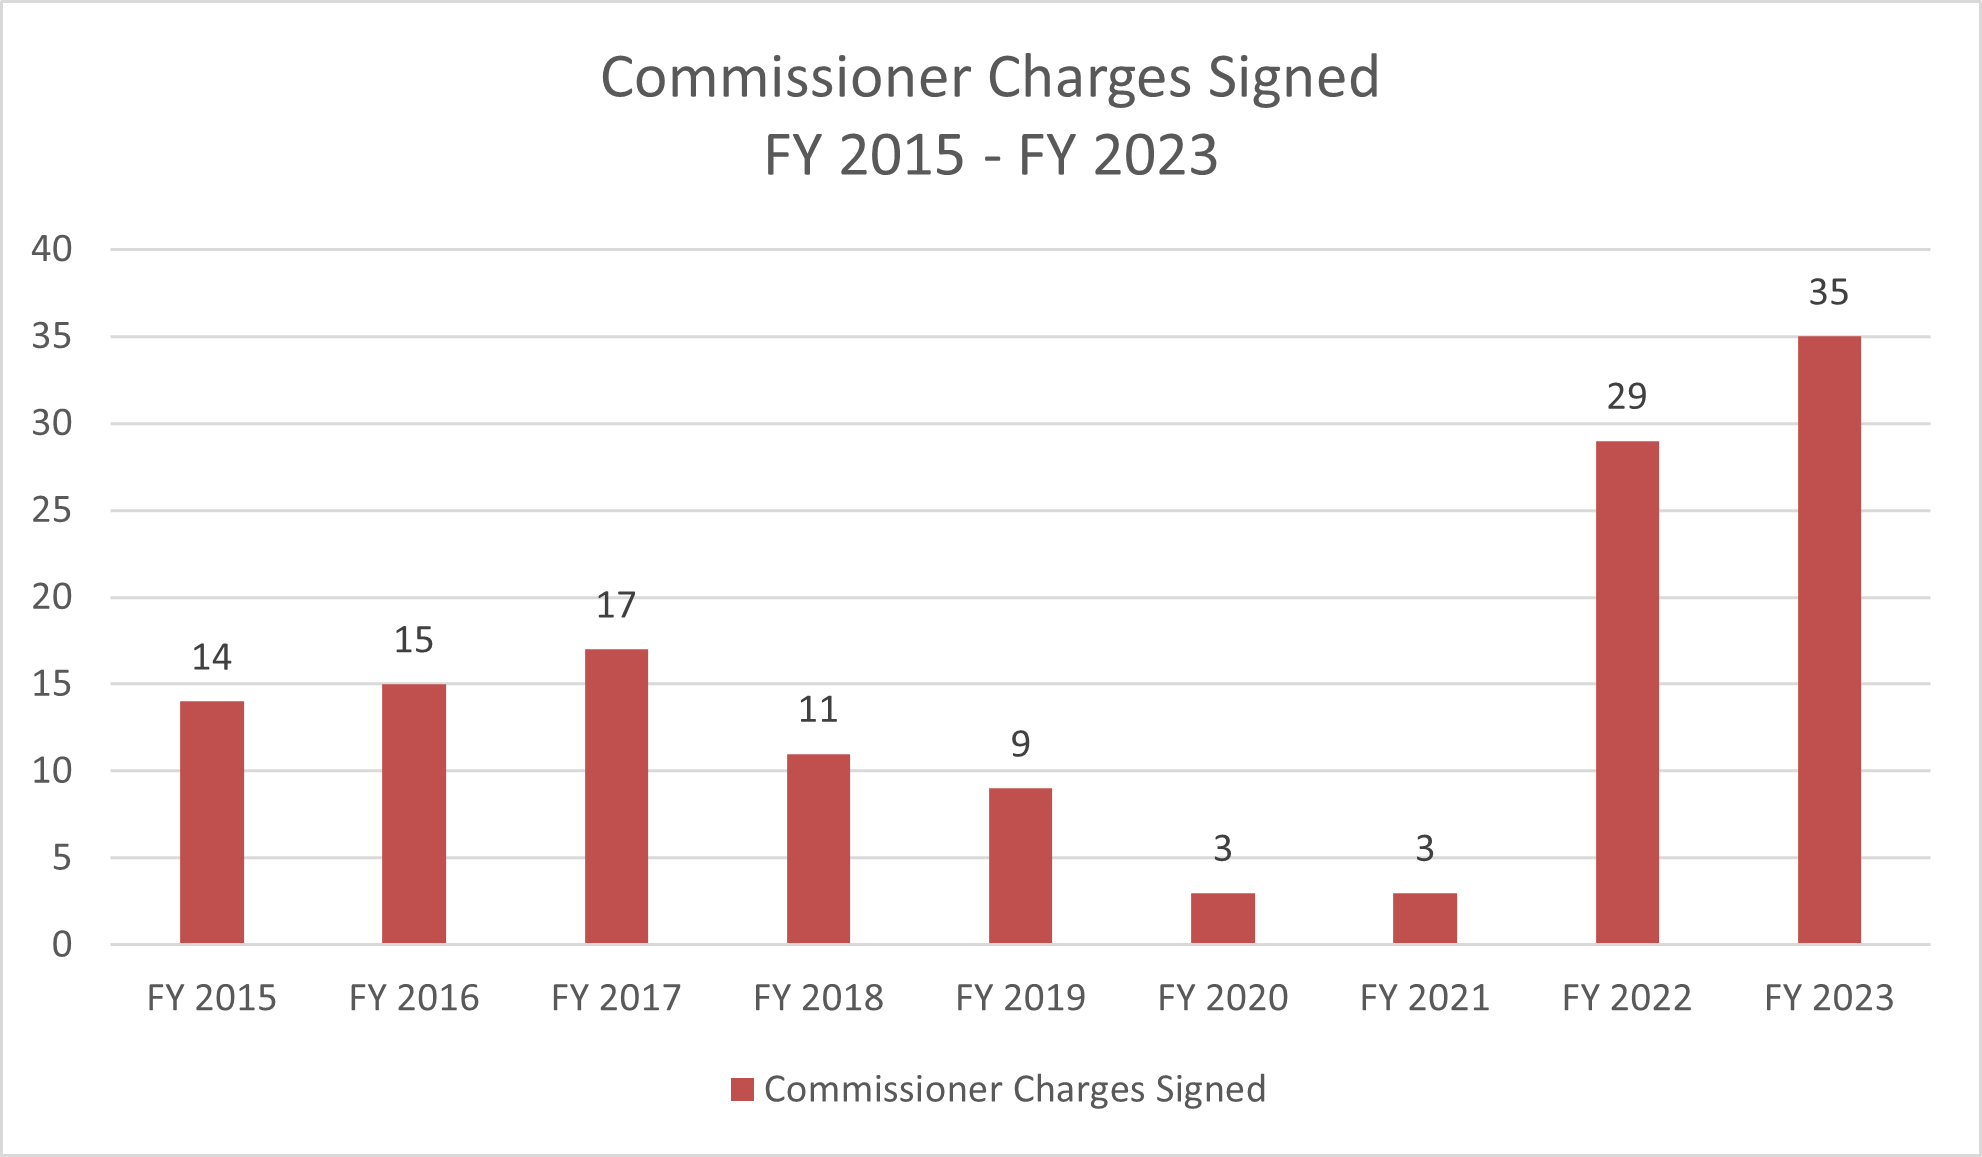 Commissioner Charges Signed FY 2015 - FY 2023